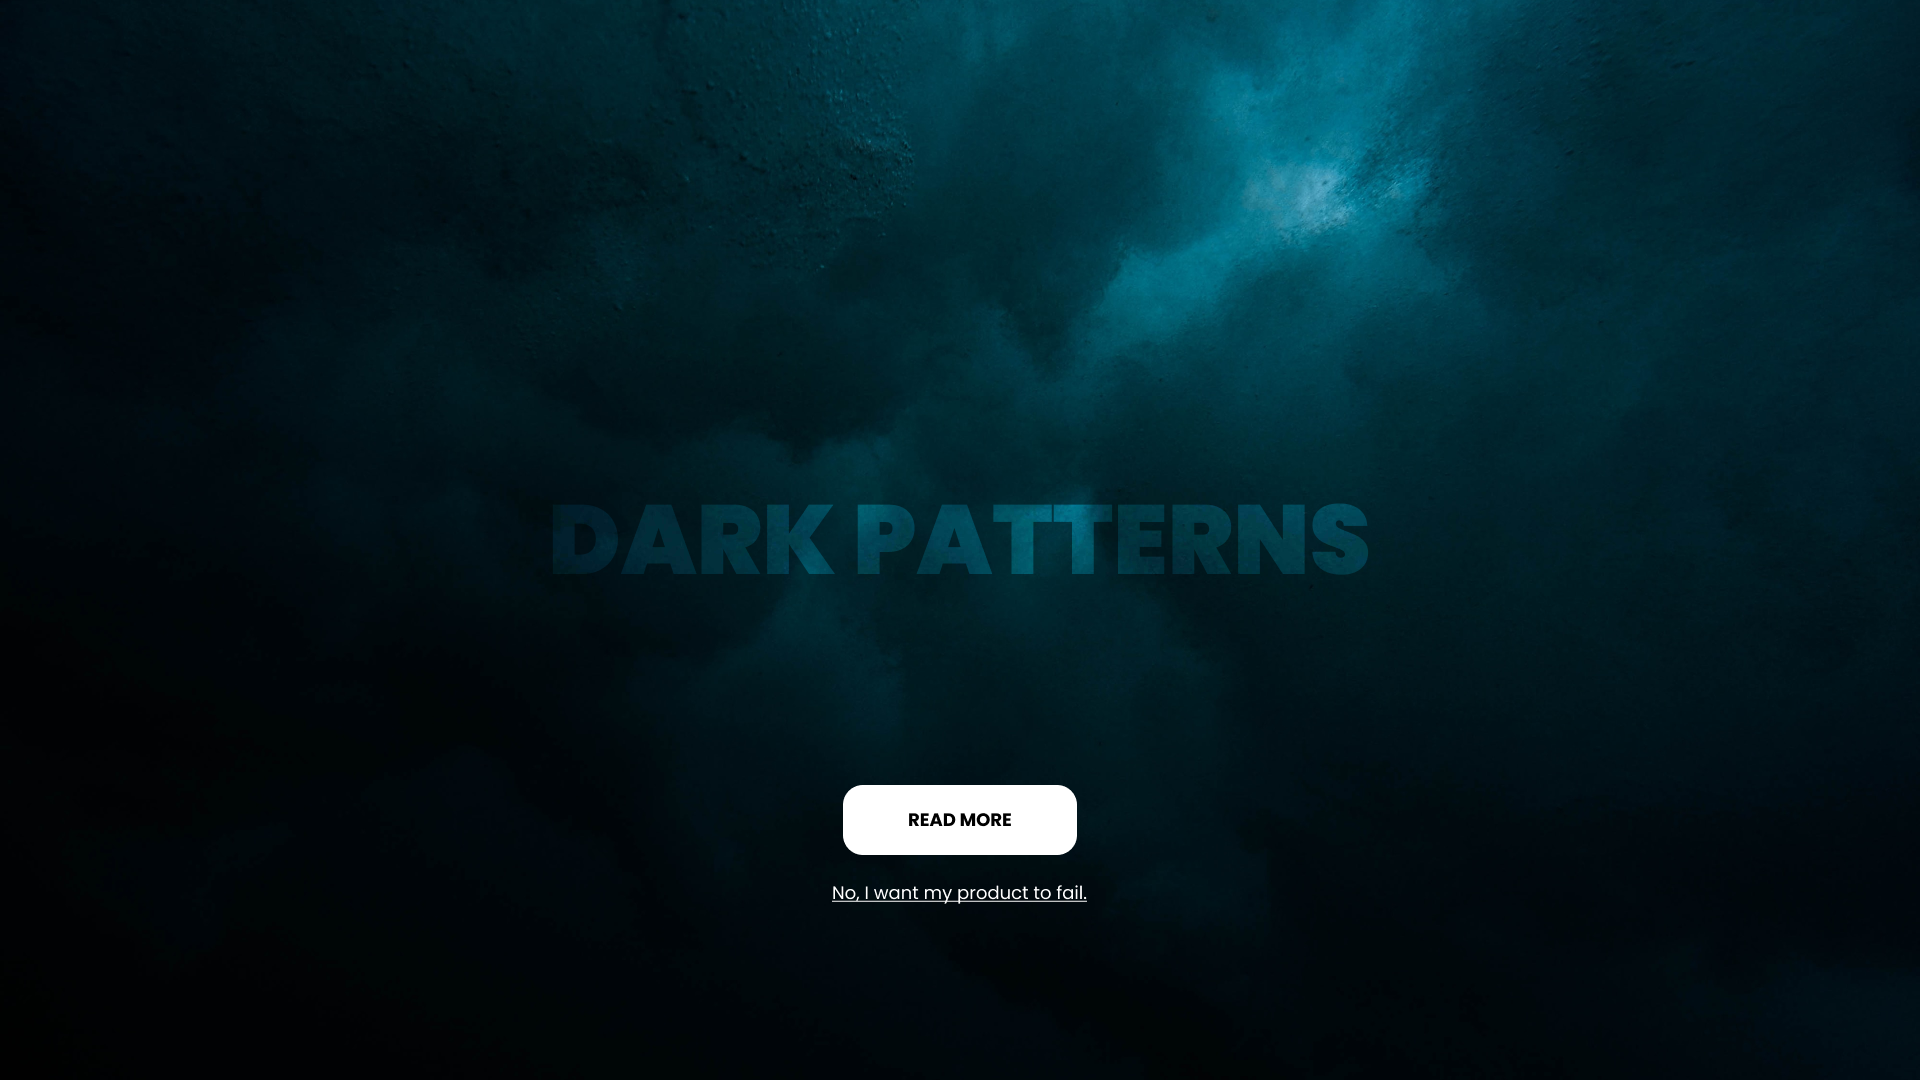 Dark patterns - what can go wrong with your product, when you don't pay attention to design?